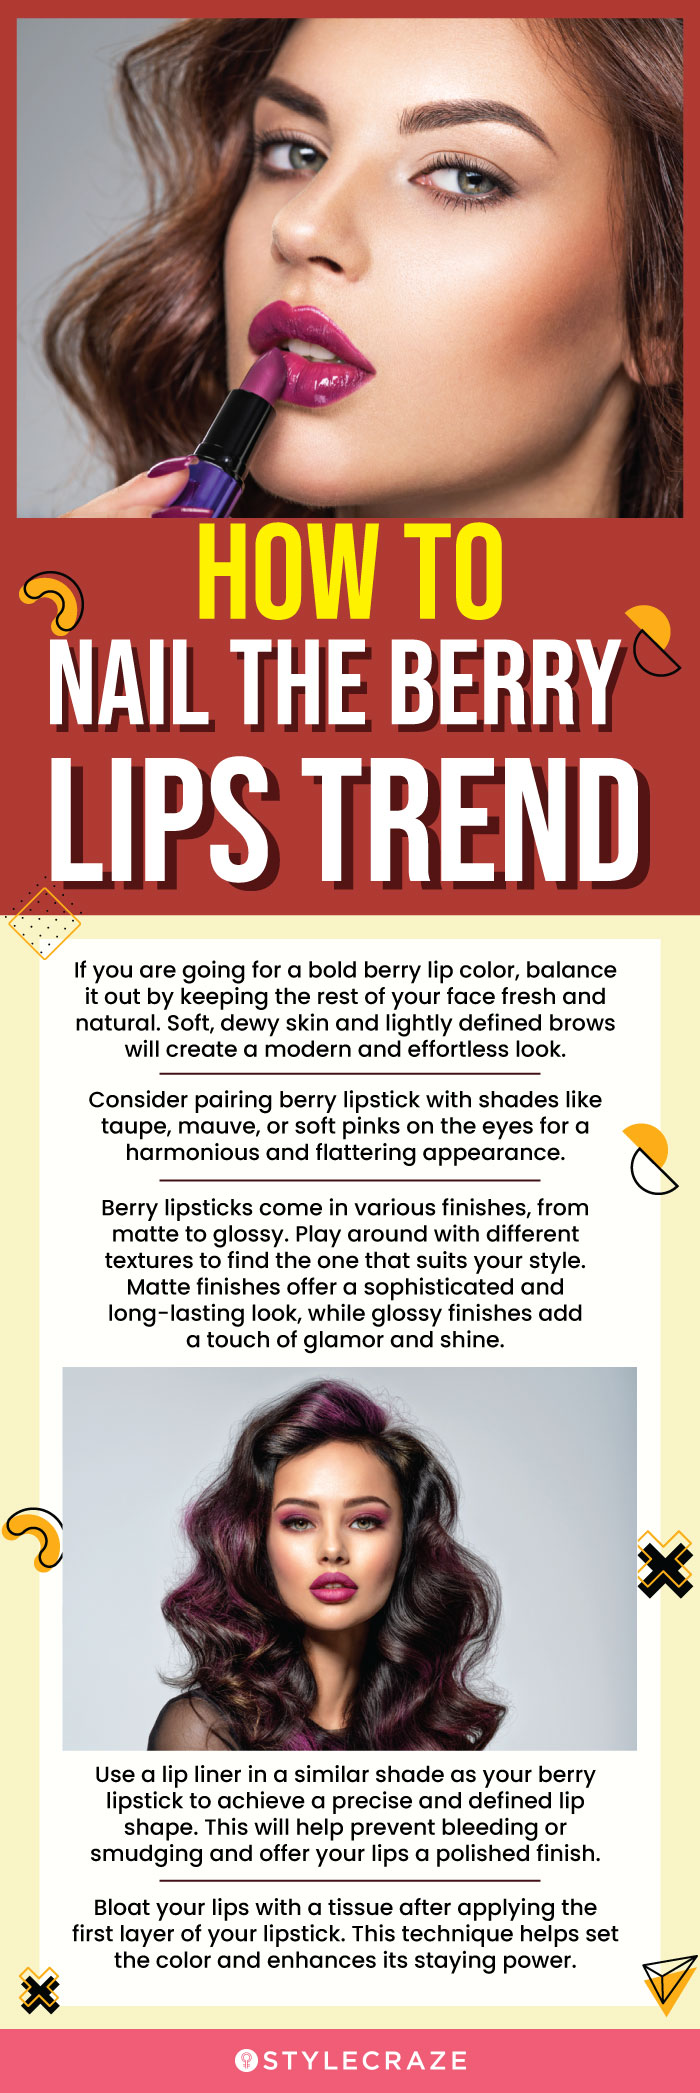 How To Nail The Berry Lips Trend (infographic)